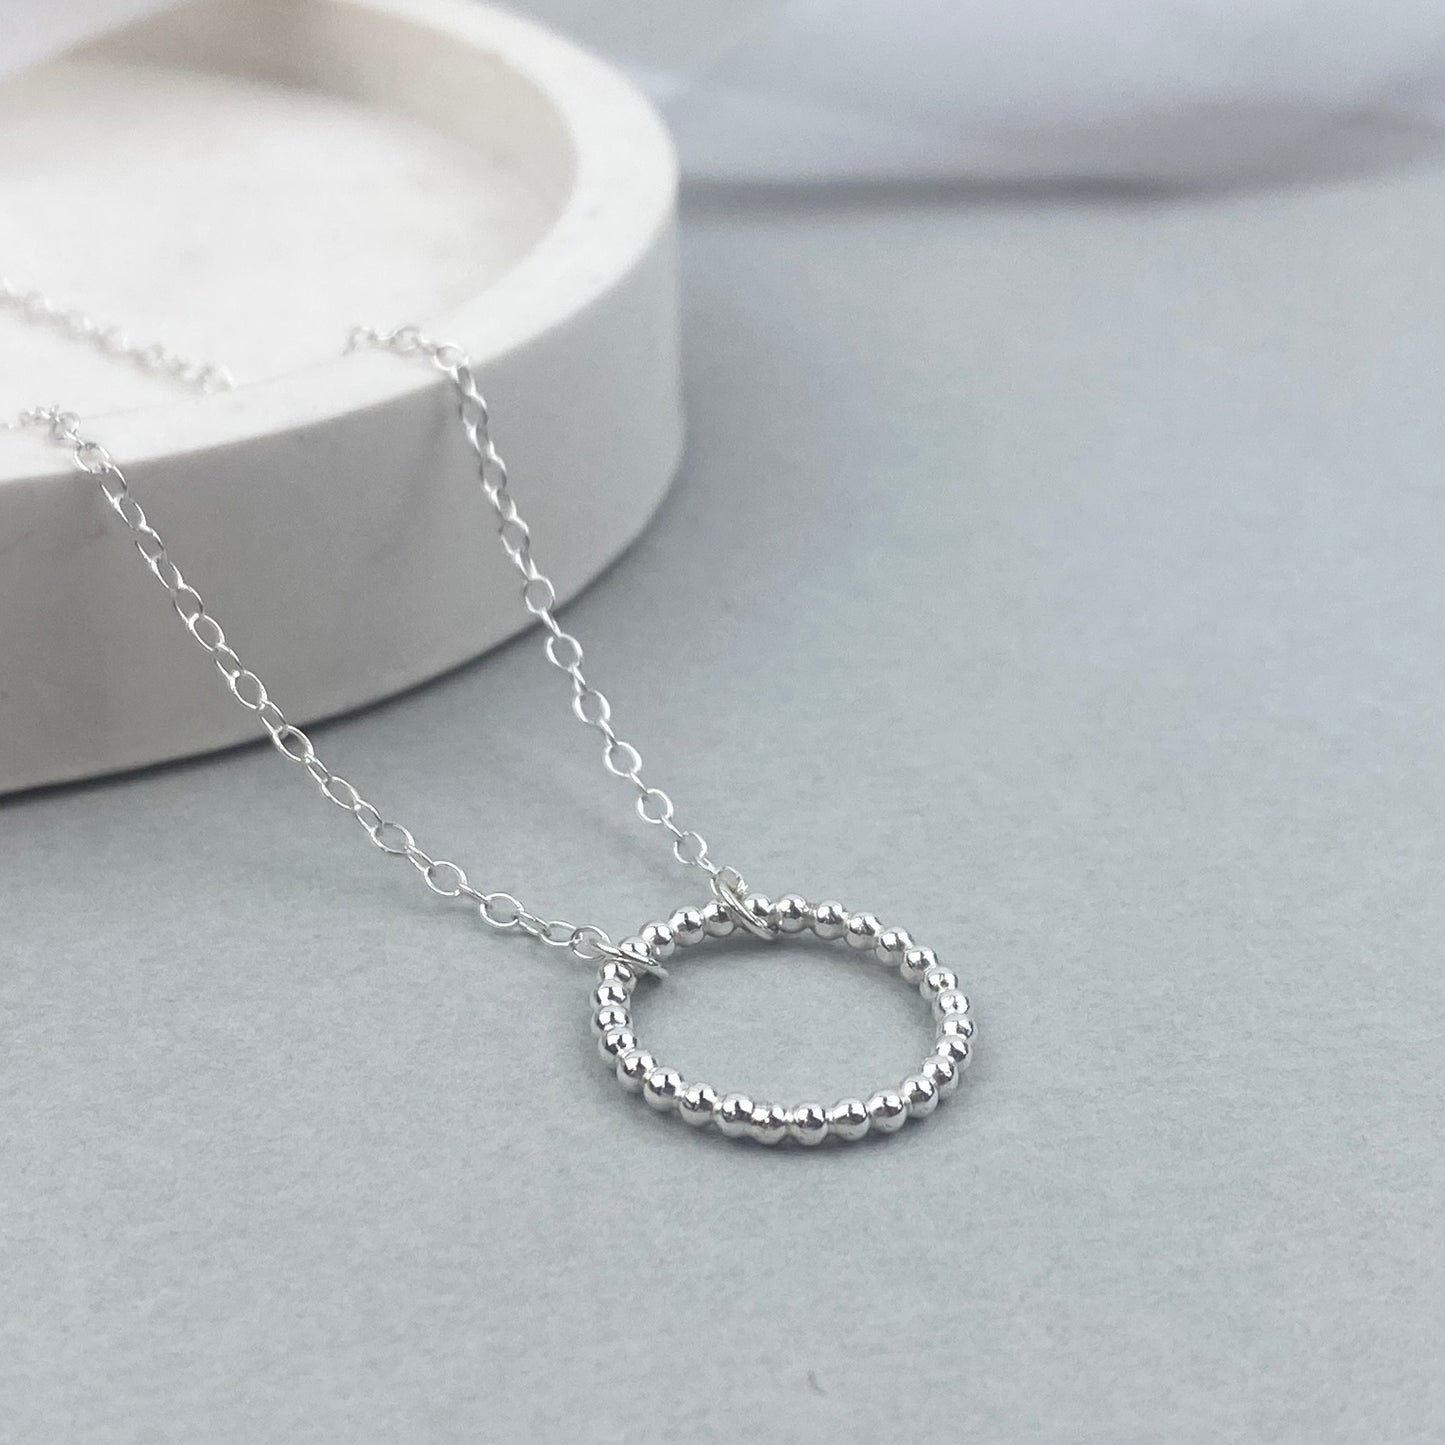 The Halo Helm Beaded Necklace - Sterling silver or 12ct gold filled beaded hoop pendant.